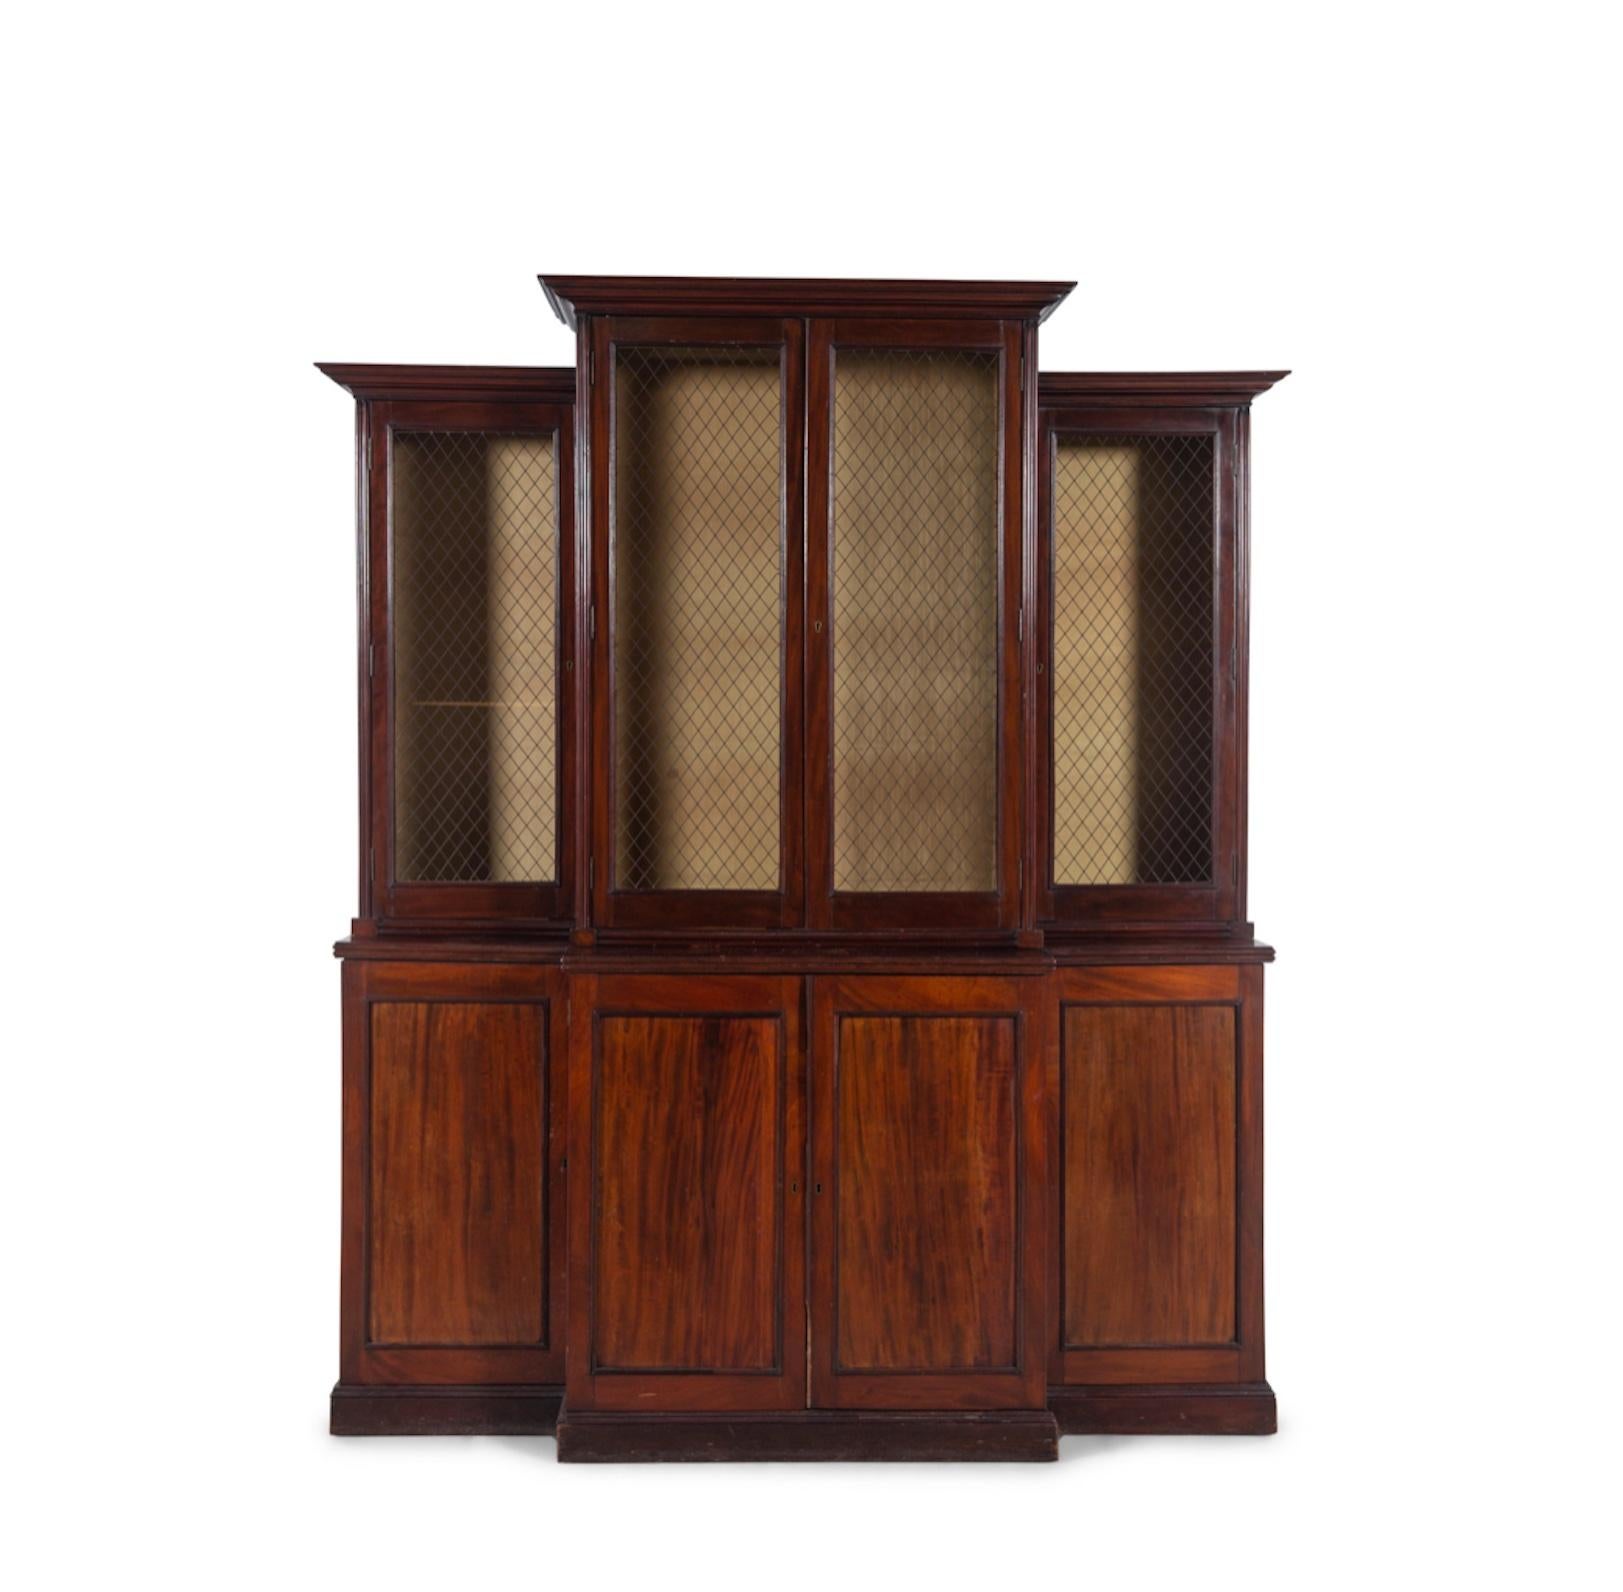 A Regency Mahogany Breakfront Bookcase 19th Century, Grilled Upper Doors. 1820 In Good Condition For Sale In Buchanan, MI